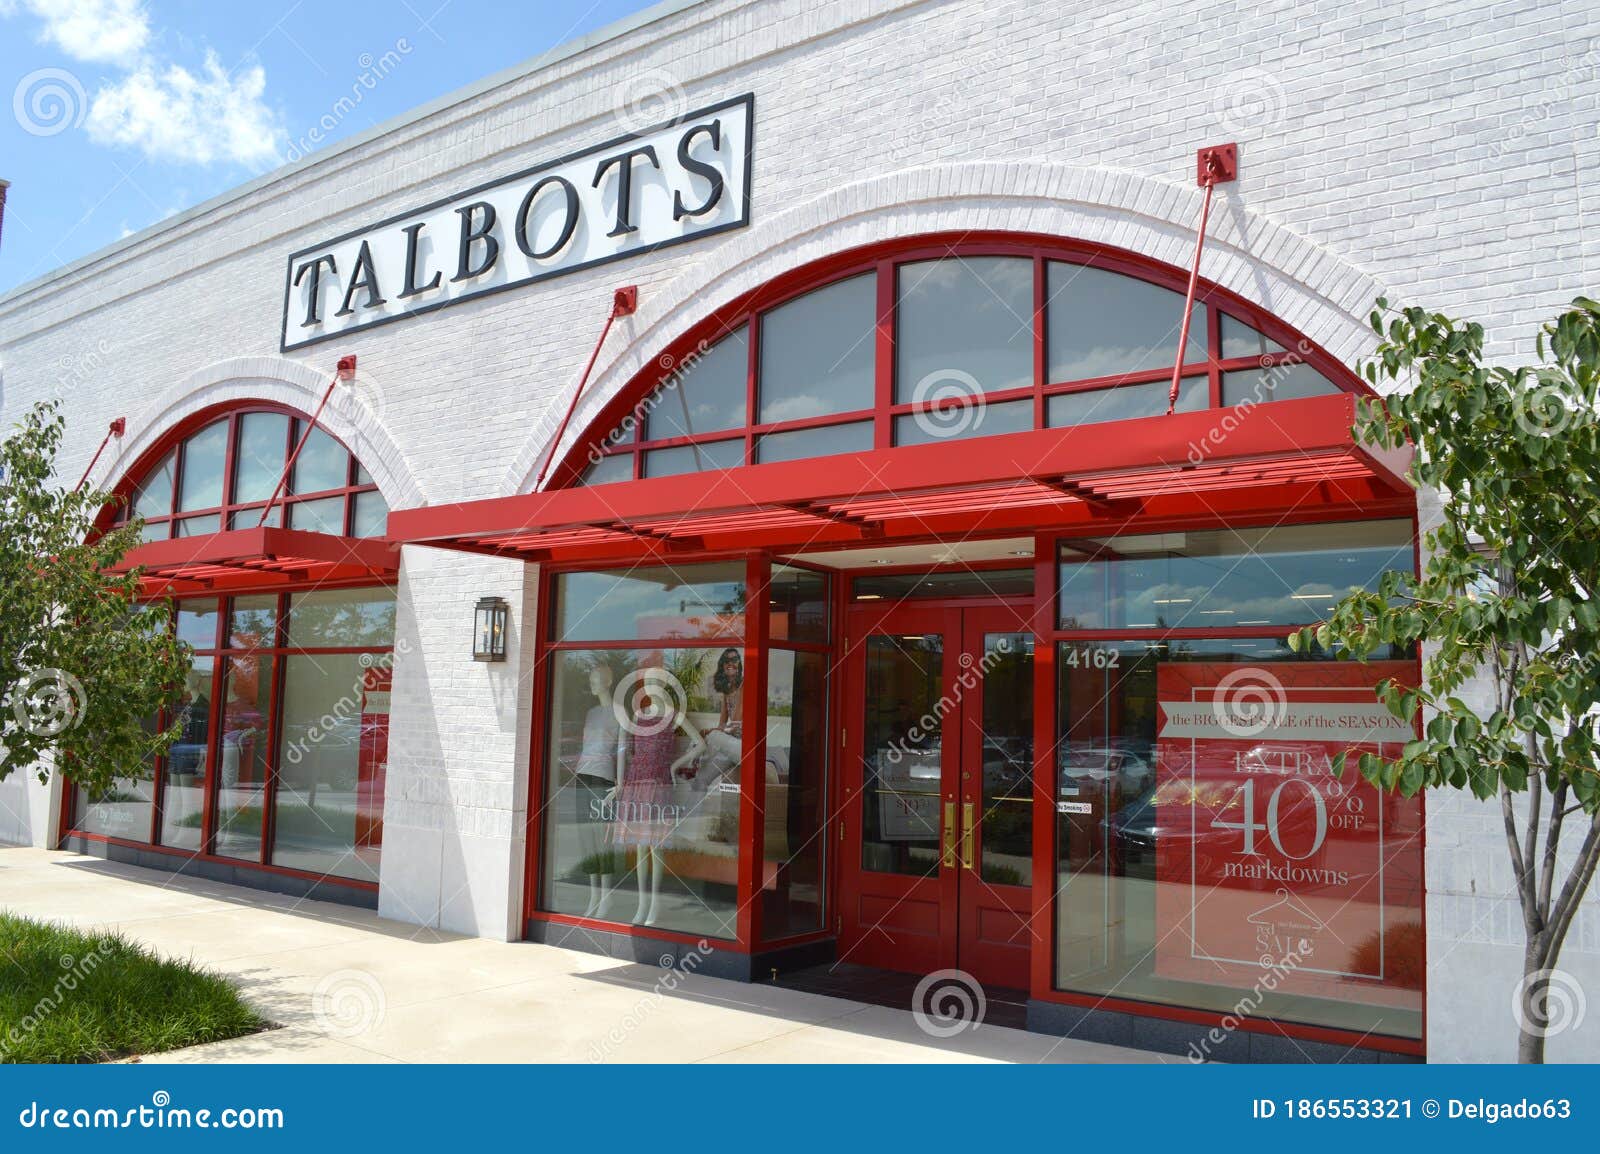 Talbots is an American Specialty Retailer and Direct Marketer of